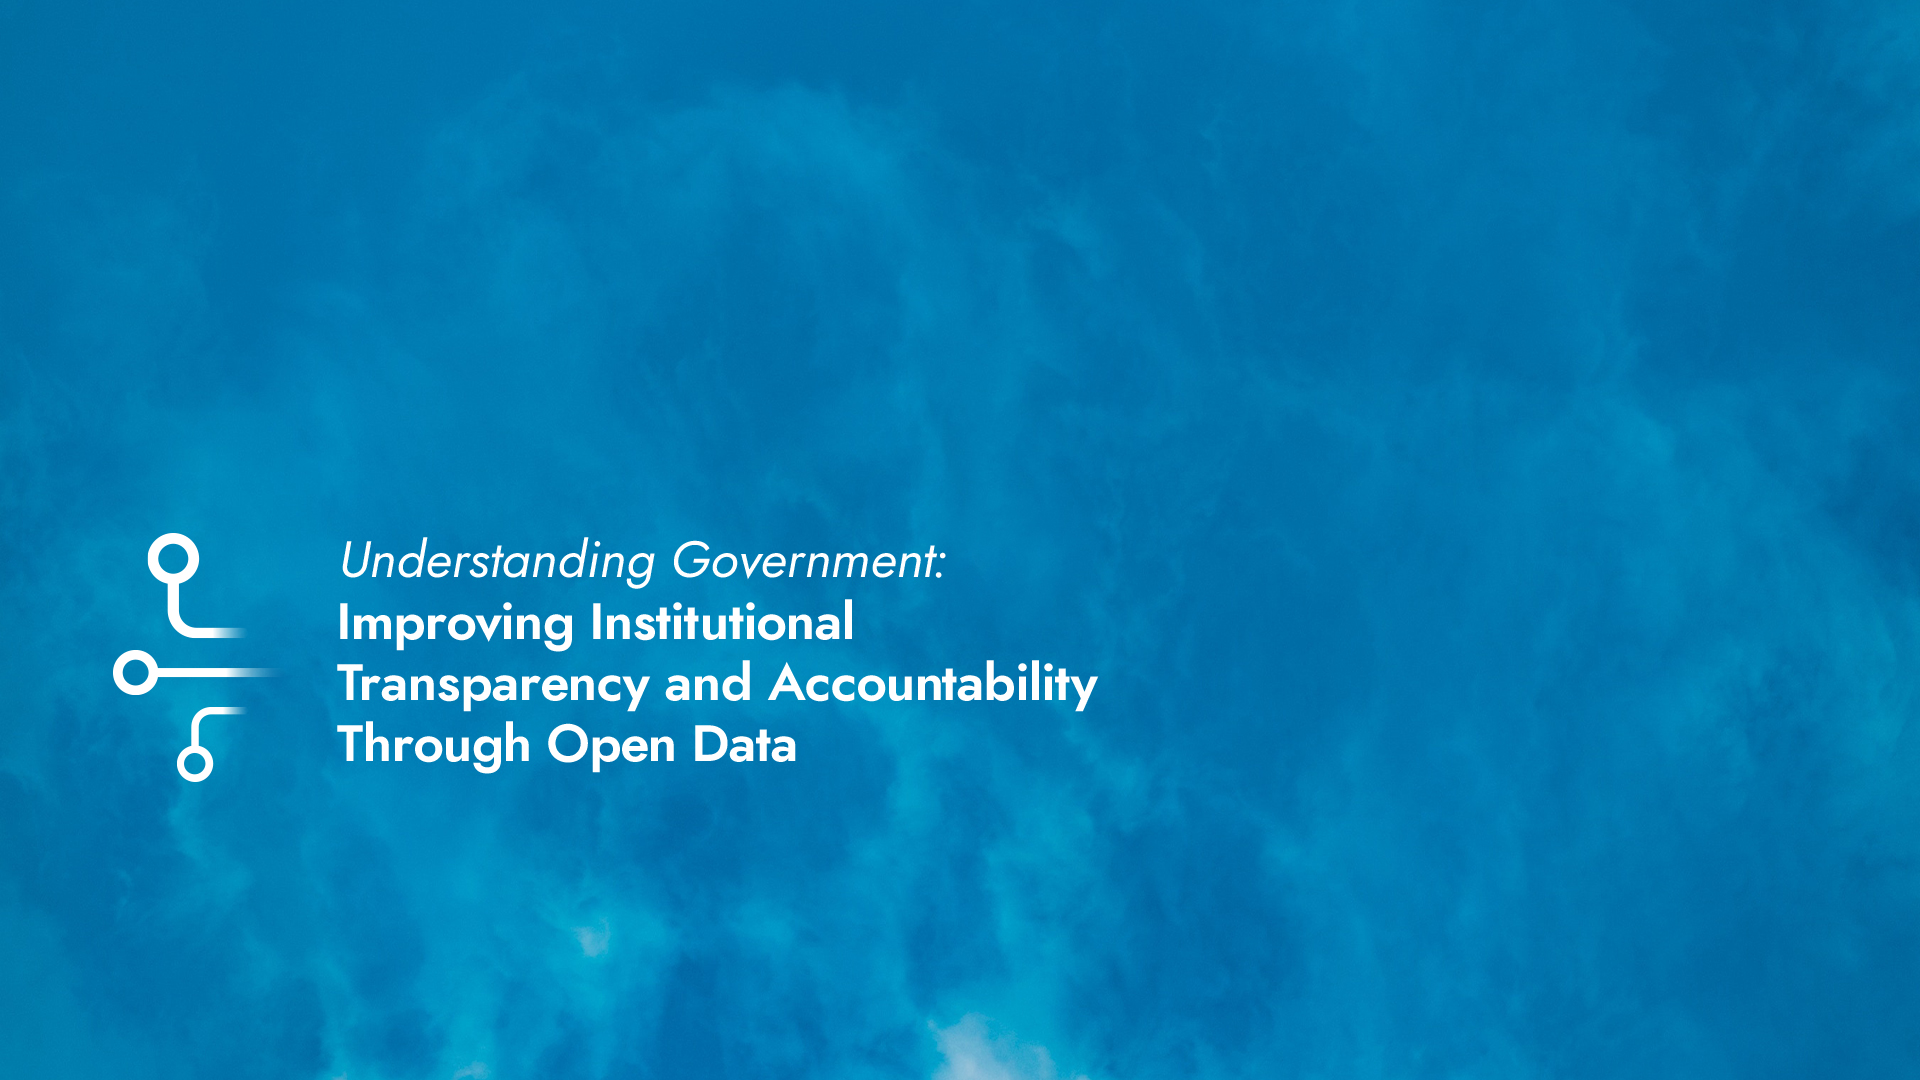 Handbook on Understanding Government: Improving Institutional Transparency and Accountability Through Open Data